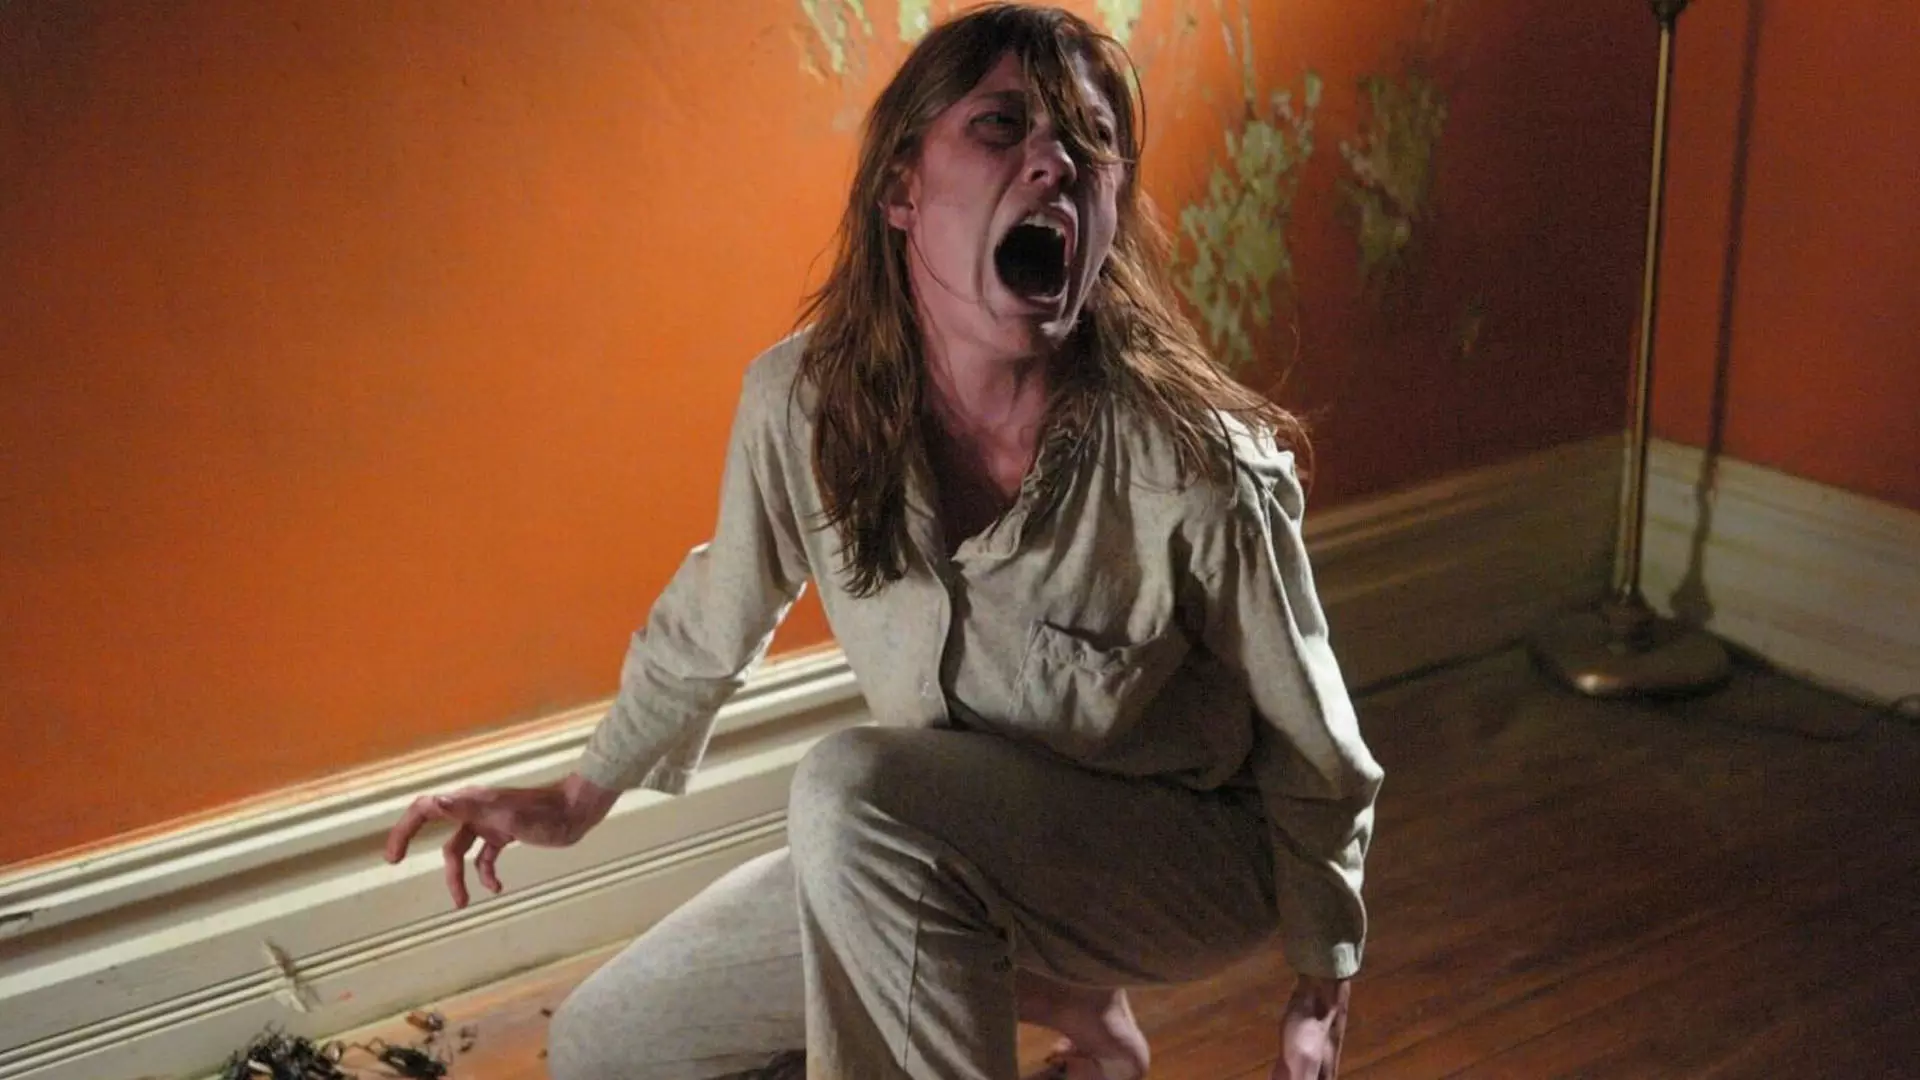 Possession sequence in the movie Exorcism of Emily Rose